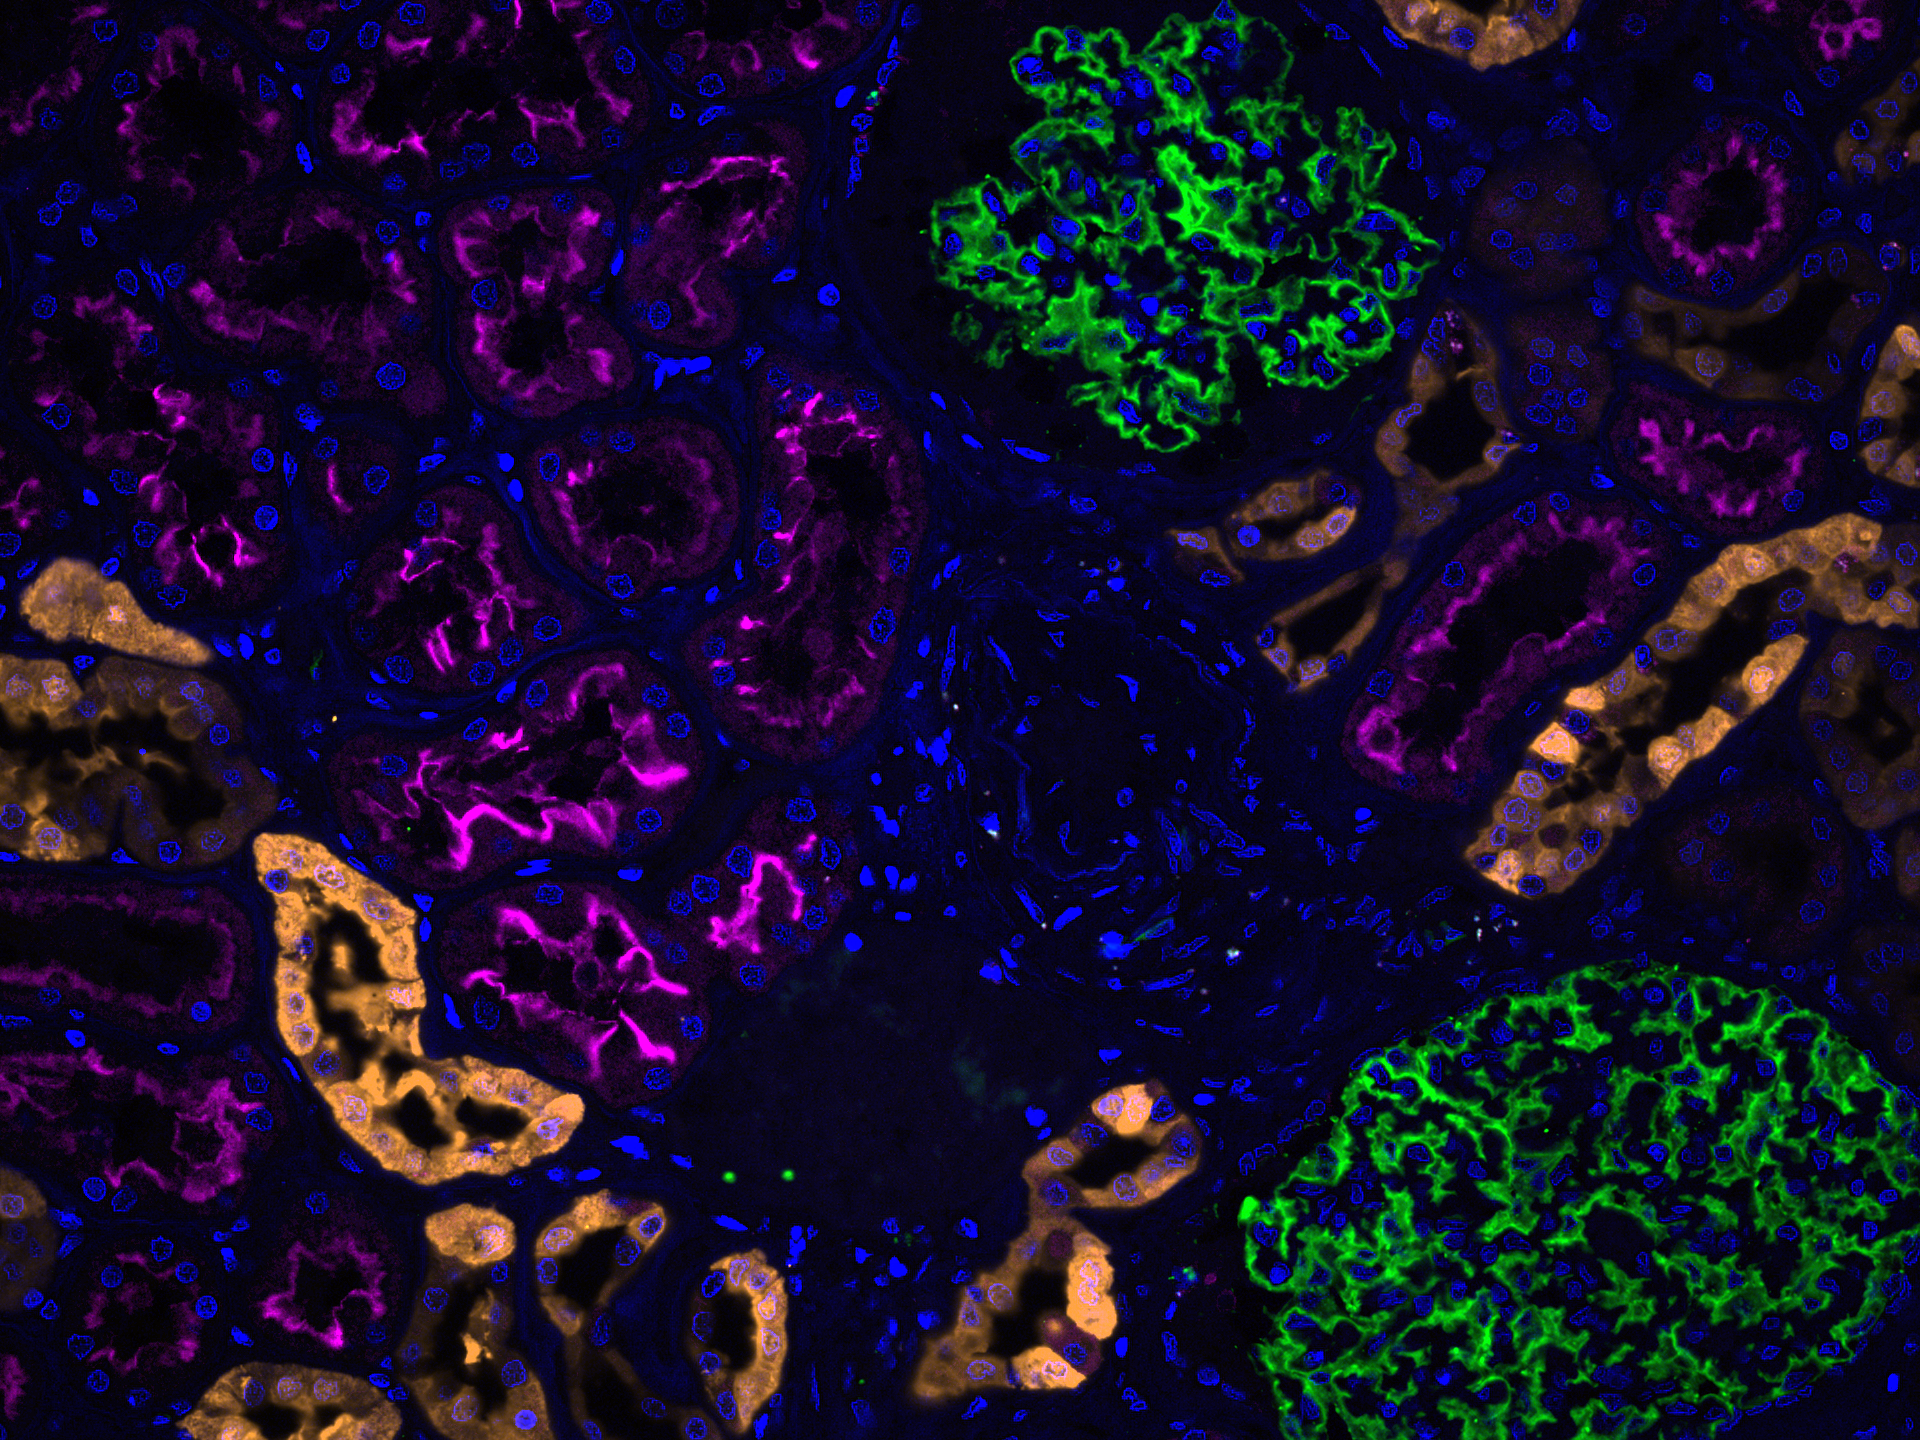 Immunofluorescence of human kidney: FFPE human kidney sections were stained with anti-Calbindin antibody (14479-1-AP) labeled with FlexAble CoraLite Plus 550 Kit (KFA002, yellow), anti-ACE2 antibody (66699-1-Ig) labeled with FlexAble CoraLite Plus 650 Kit (KFA023, magenta), CoraLite®488-conjugated Podocalyxin antibody (CL488-18150, green) and DAPI (blue).